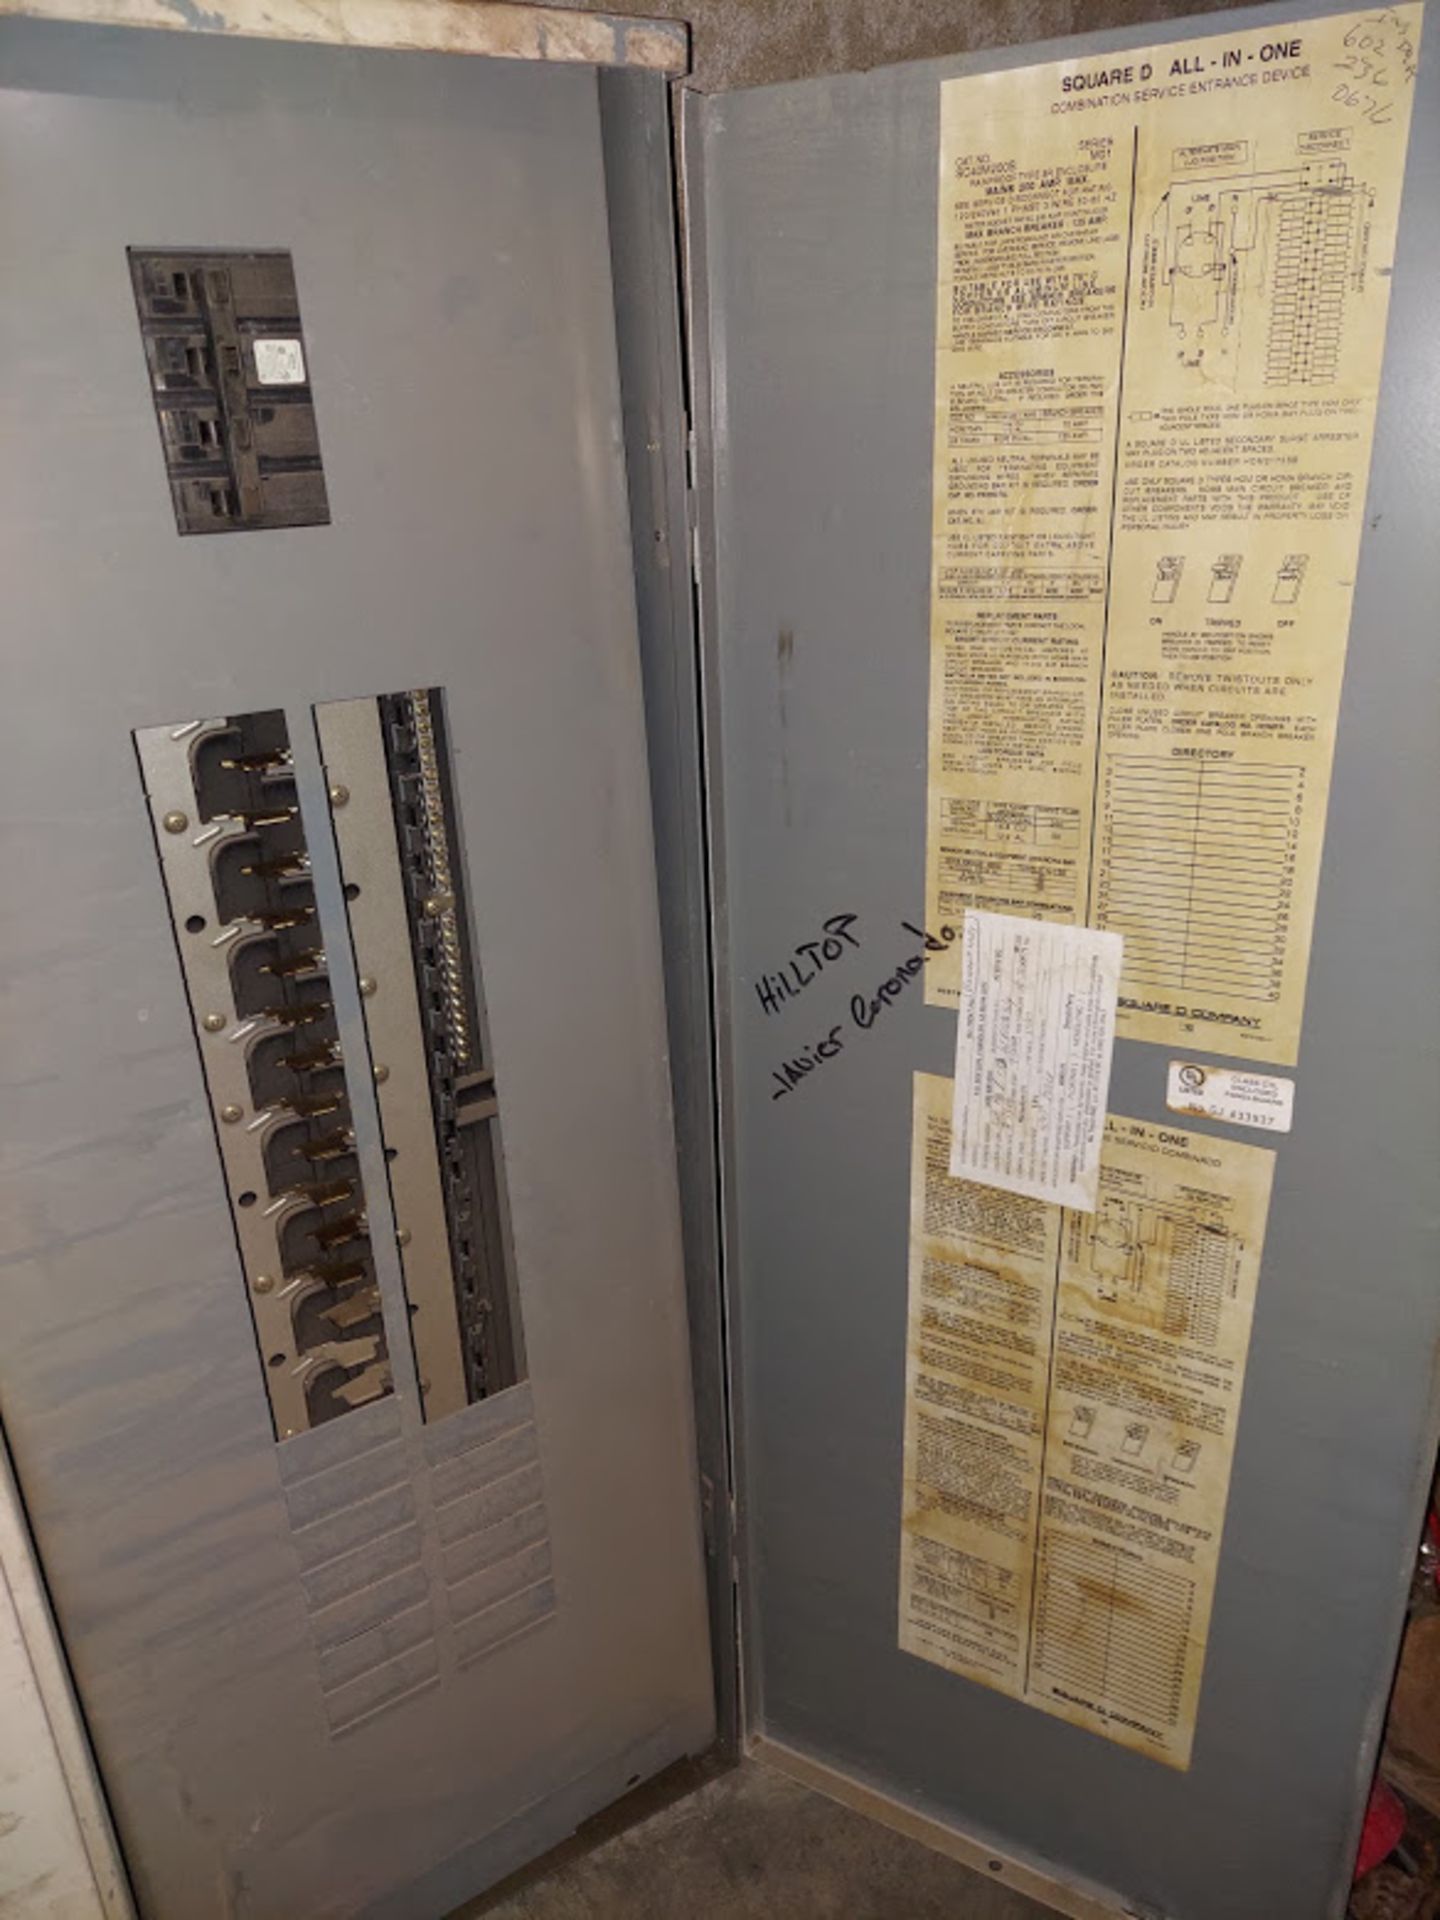 2 -Square D Electrical Service Panels - Image 3 of 3